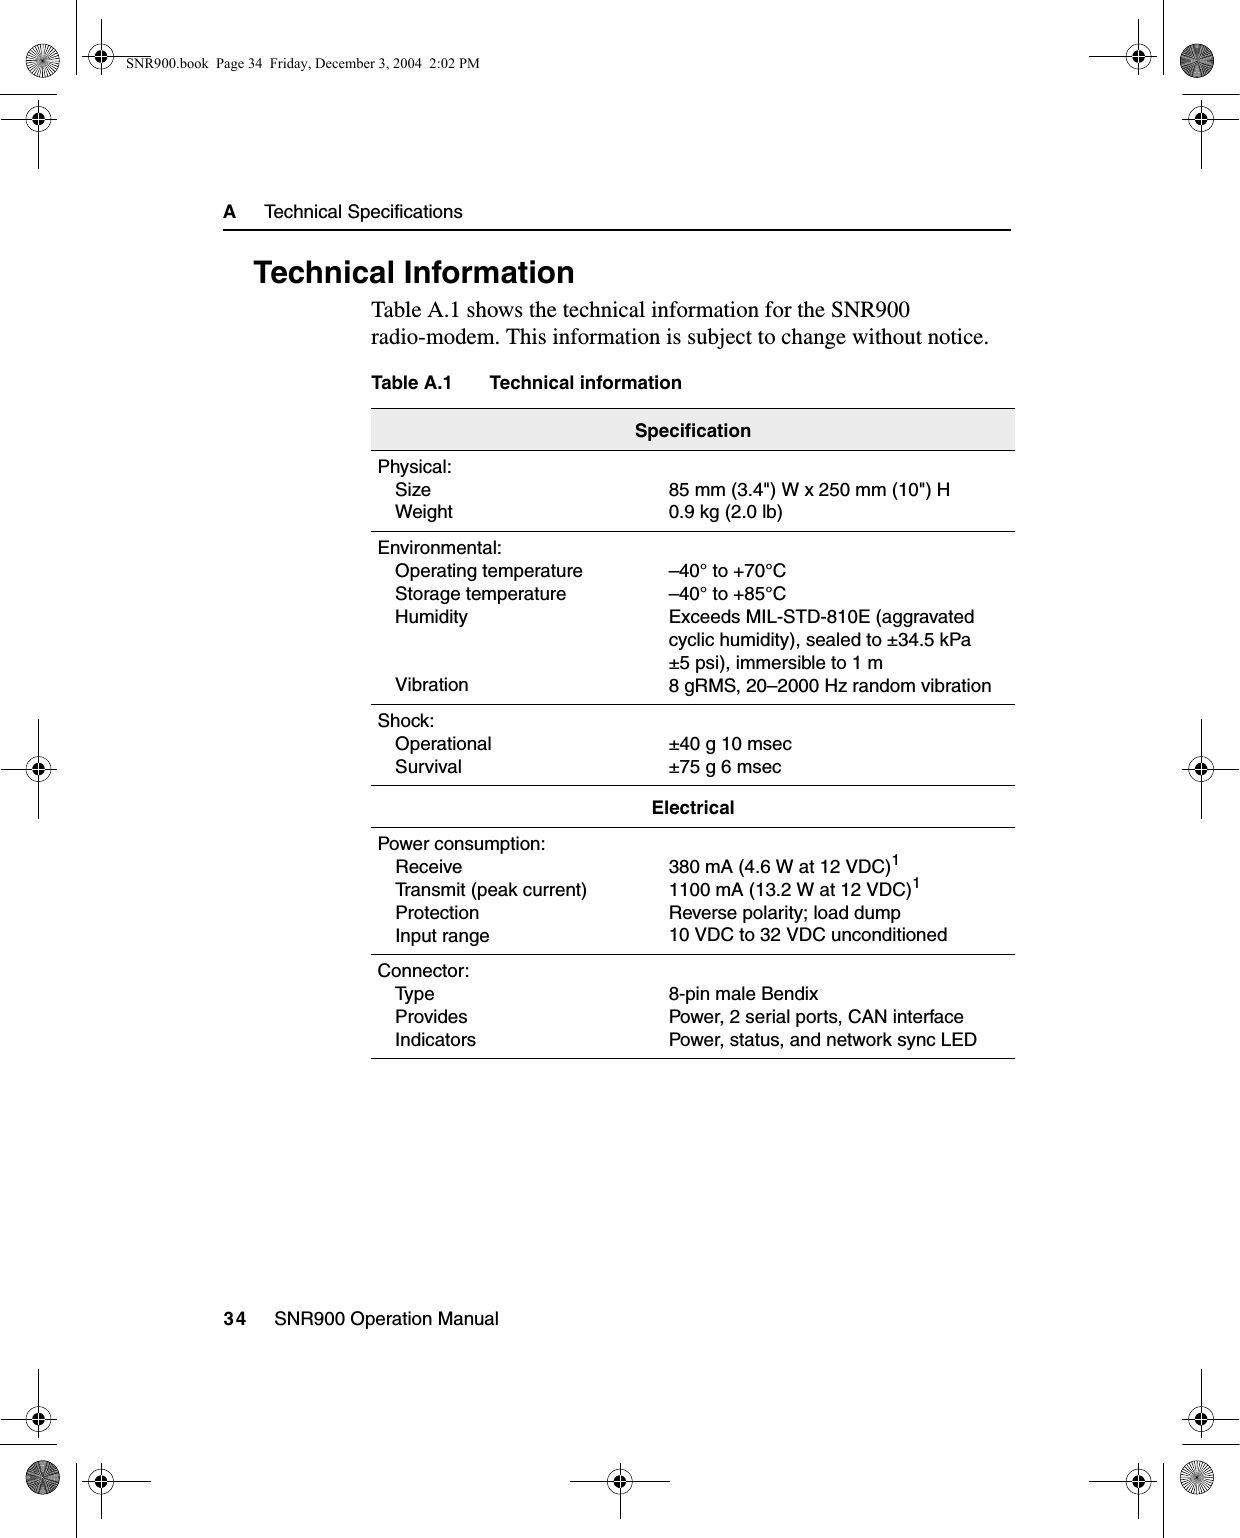 A     Technical Specifications34     SNR900 Operation ManualA.1 Technical InformationTable A.1 shows the technical information for the SNR900 radio-modem. This information is subject to change without notice.Table A.1 Technical informationSpecificationPhysical:SizeWeight85 mm (3.4&quot;) W x 250 mm (10&quot;) H0.9 kg (2.0 lb)Environmental:Operating temperatureStorage temperatureHumidityVibration–40° to +70°C–40° to +85°CExceeds MIL-STD-810E (aggravatedcyclic humidity), sealed to ±34.5 kPa±5 psi), immersible to 1 m8 gRMS, 20–2000 Hz random vibrationShock:OperationalSurvival±40g10msec±75g6msecElectricalPower consumption:ReceiveTransmit (peak current)ProtectionInput range380 mA (4.6 W at 12 VDC)11100 mA (13.2 W at 12 VDC)1Reverse polarity; load dump10 VDC to 32 VDC unconditionedConnector:Ty p eProvidesIndicators8-pin male BendixPower, 2 serial ports, CAN interfacePower, status, and network sync LEDSNR900.book  Page 34  Friday, December 3, 2004  2:02 PM